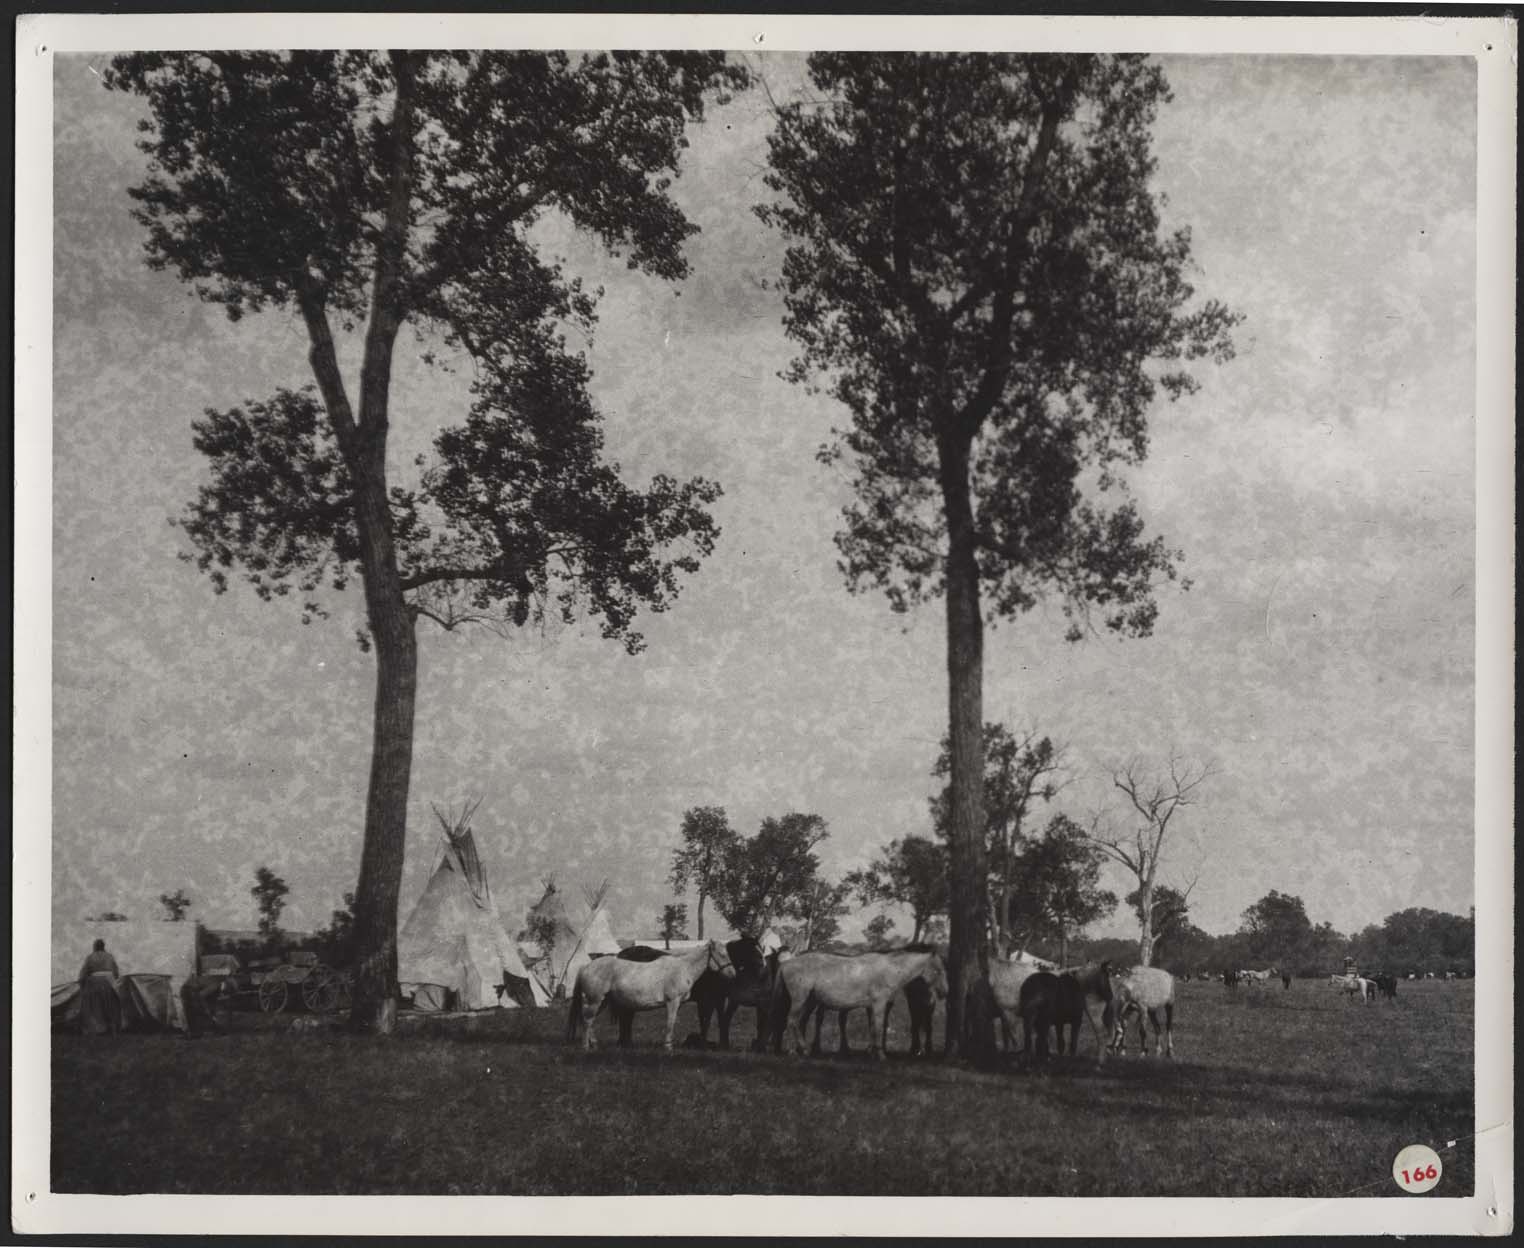 Horses, tipis and people at the Elbowoods Campground on Fort Berthold Reservation.